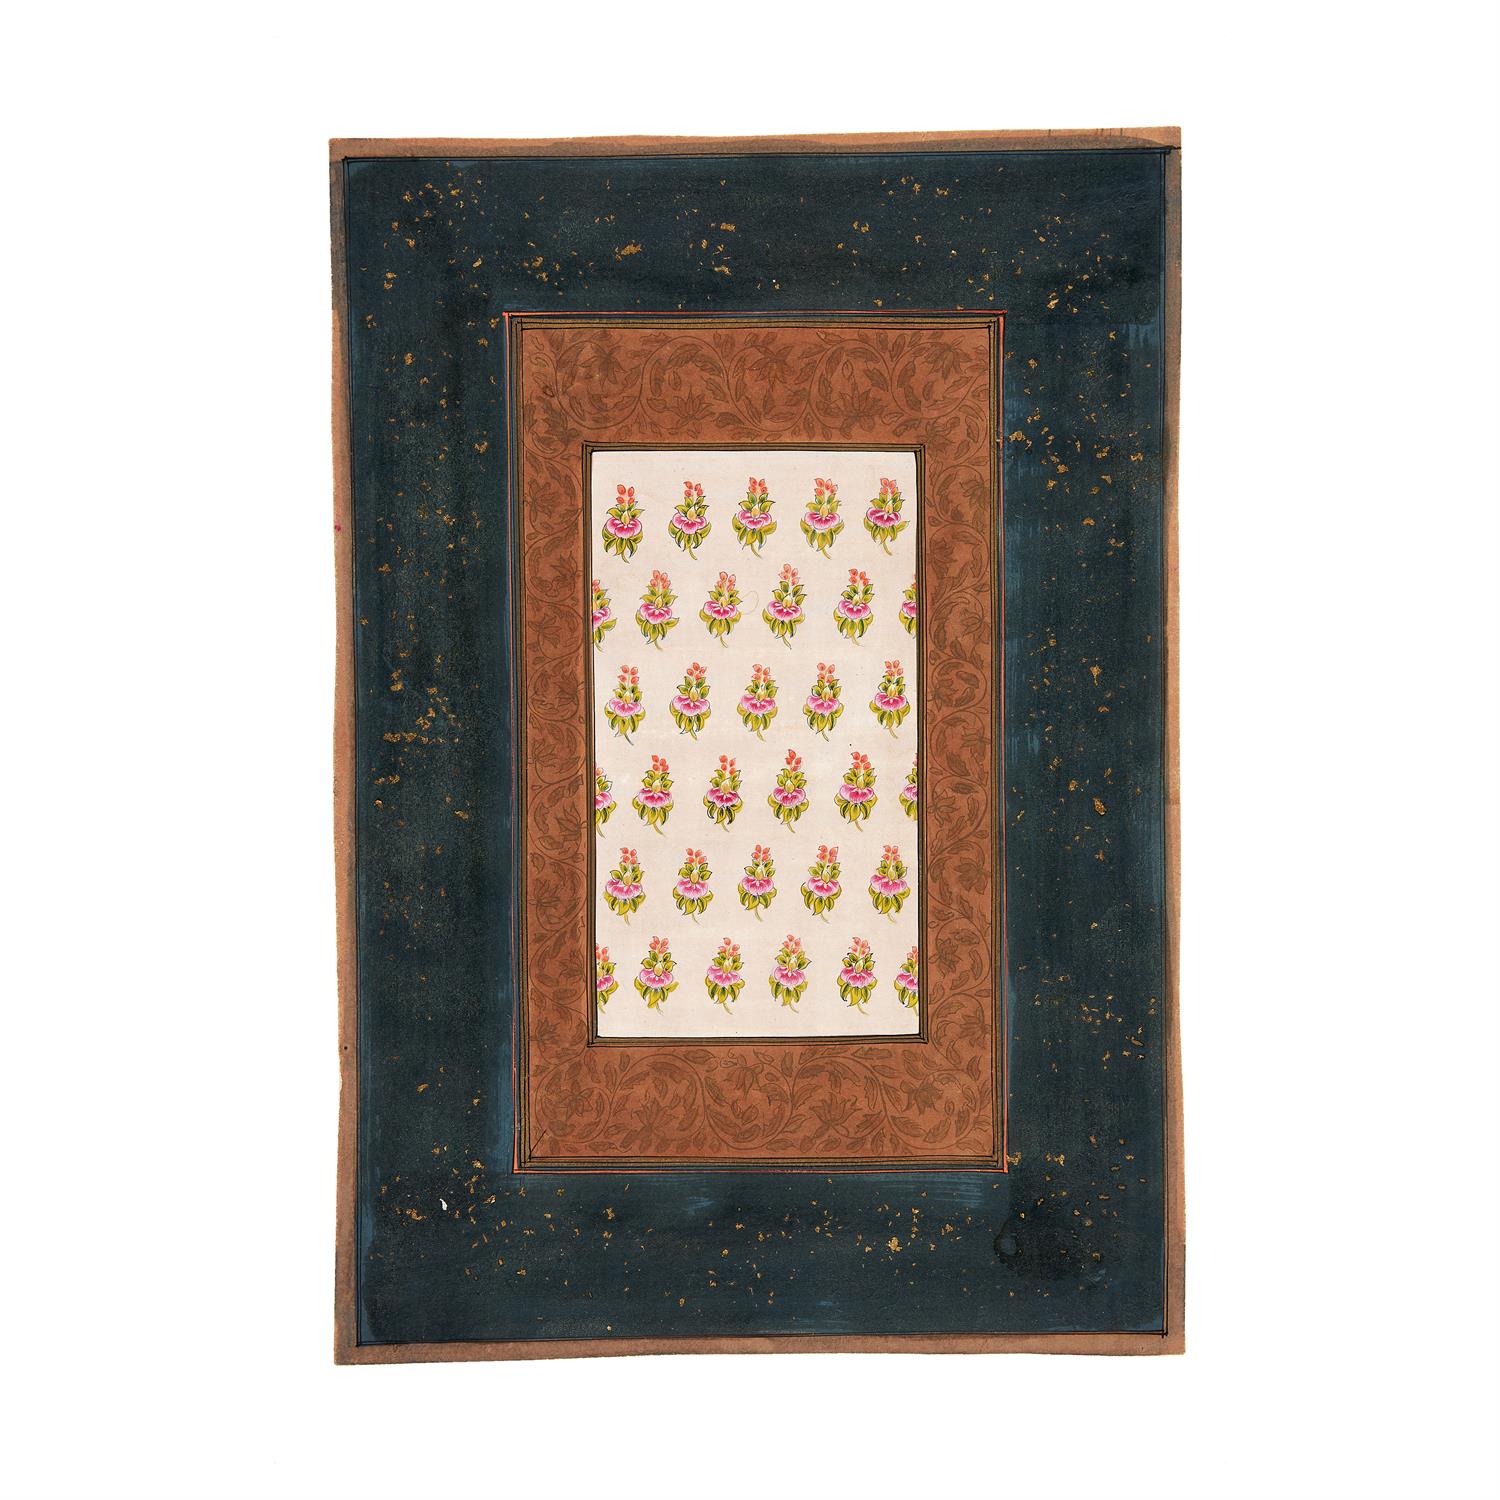 Indian botanical painting, painted on card [India (probably Rajasthan), early 20th century] - Image 2 of 2